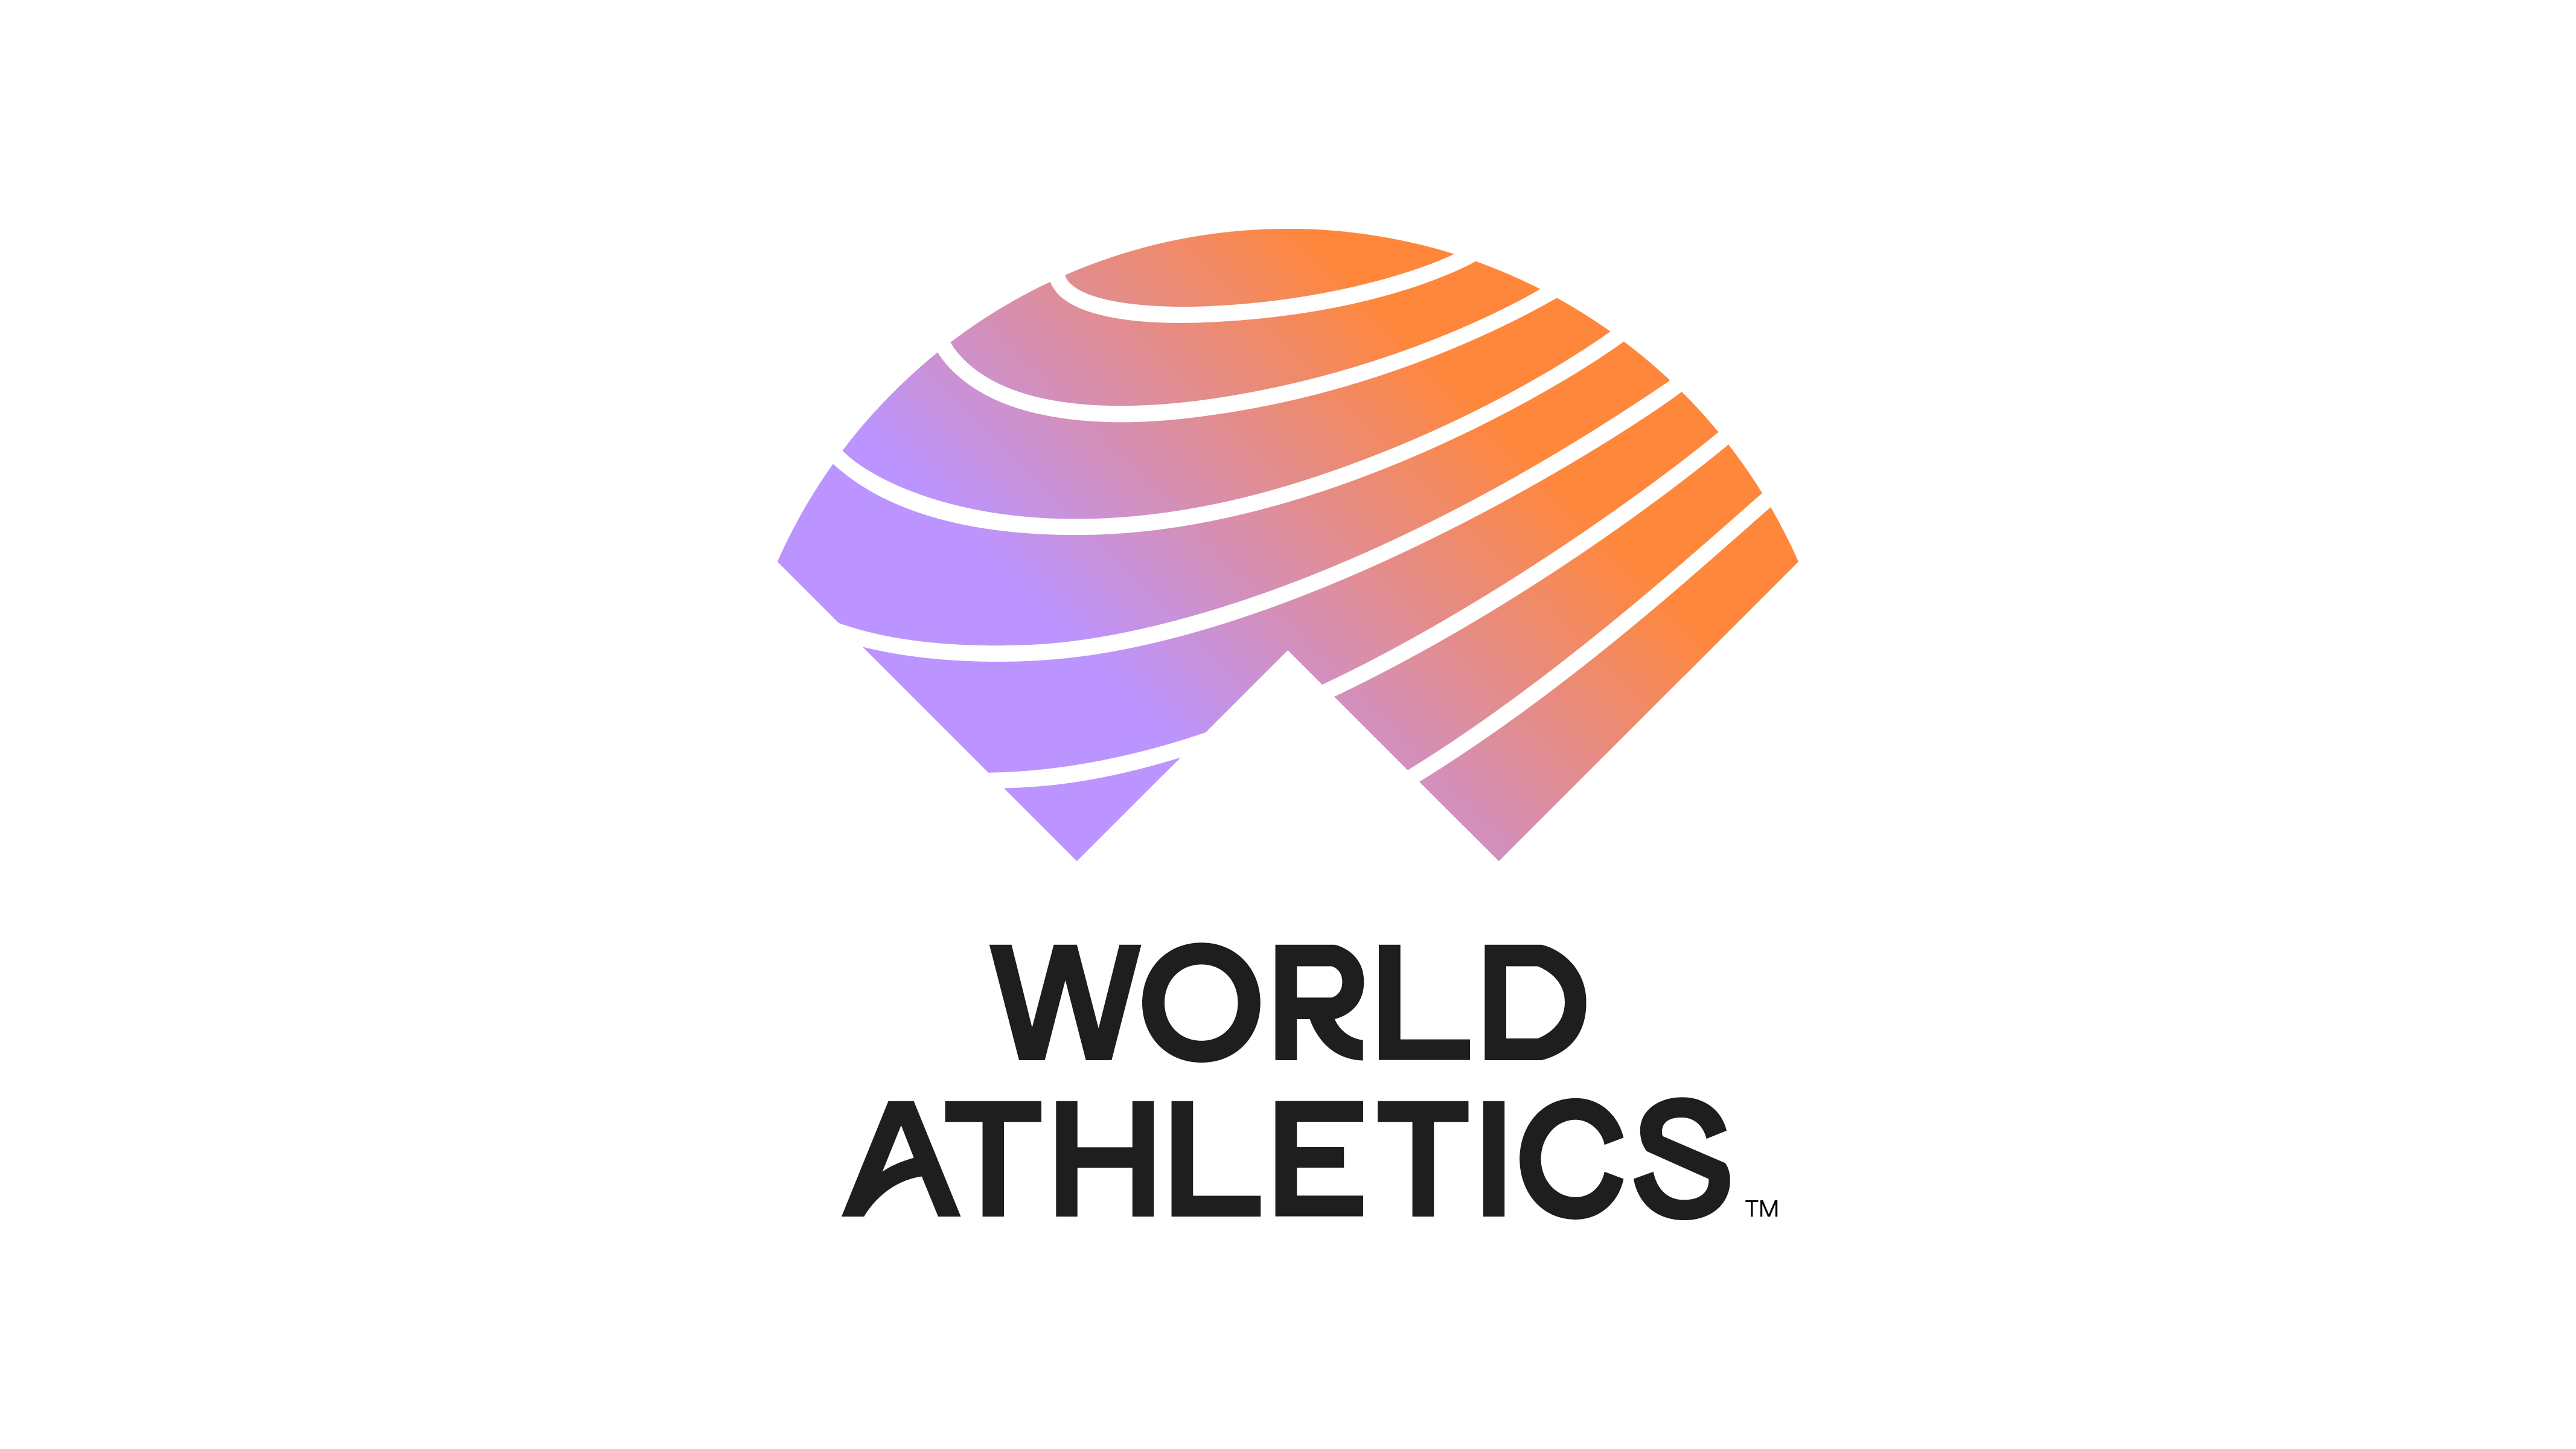 IAAF unveils new name and logo